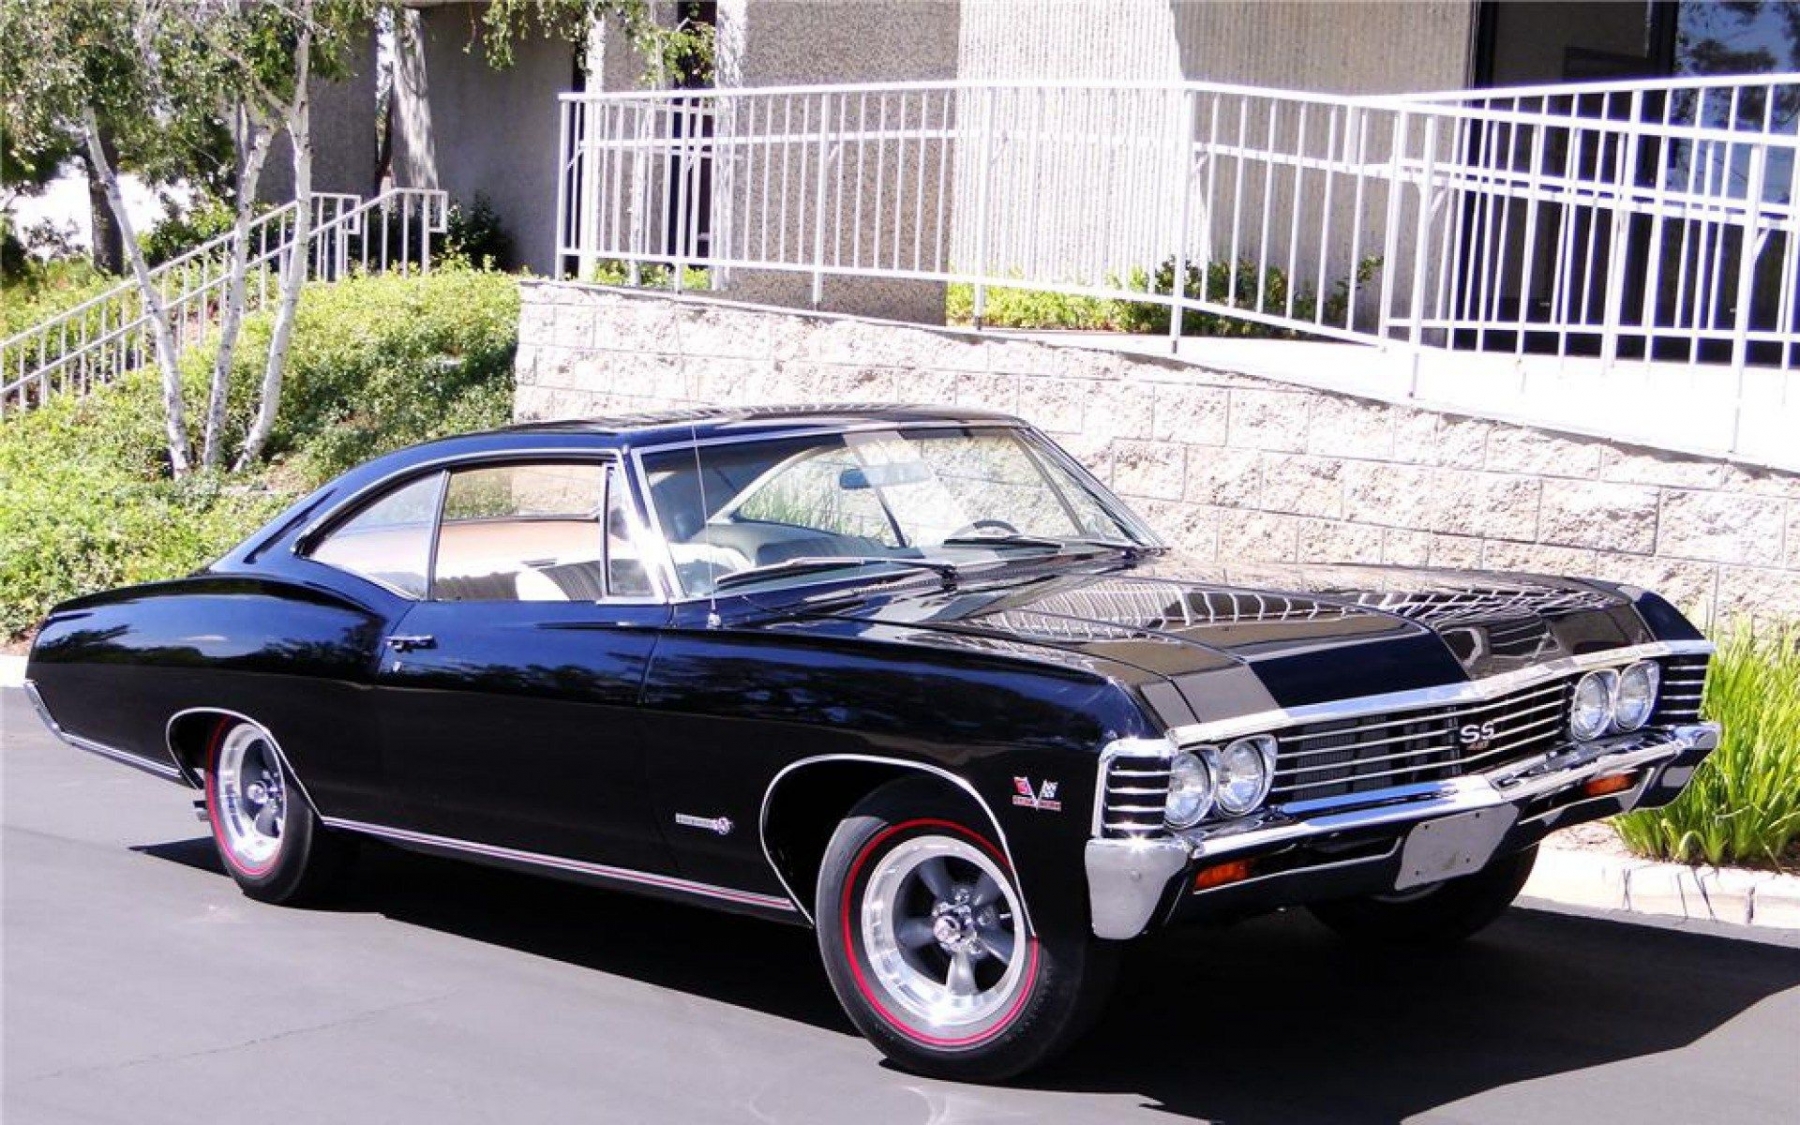 1967 Chevrolet Impala HD Wallpapers Background Images